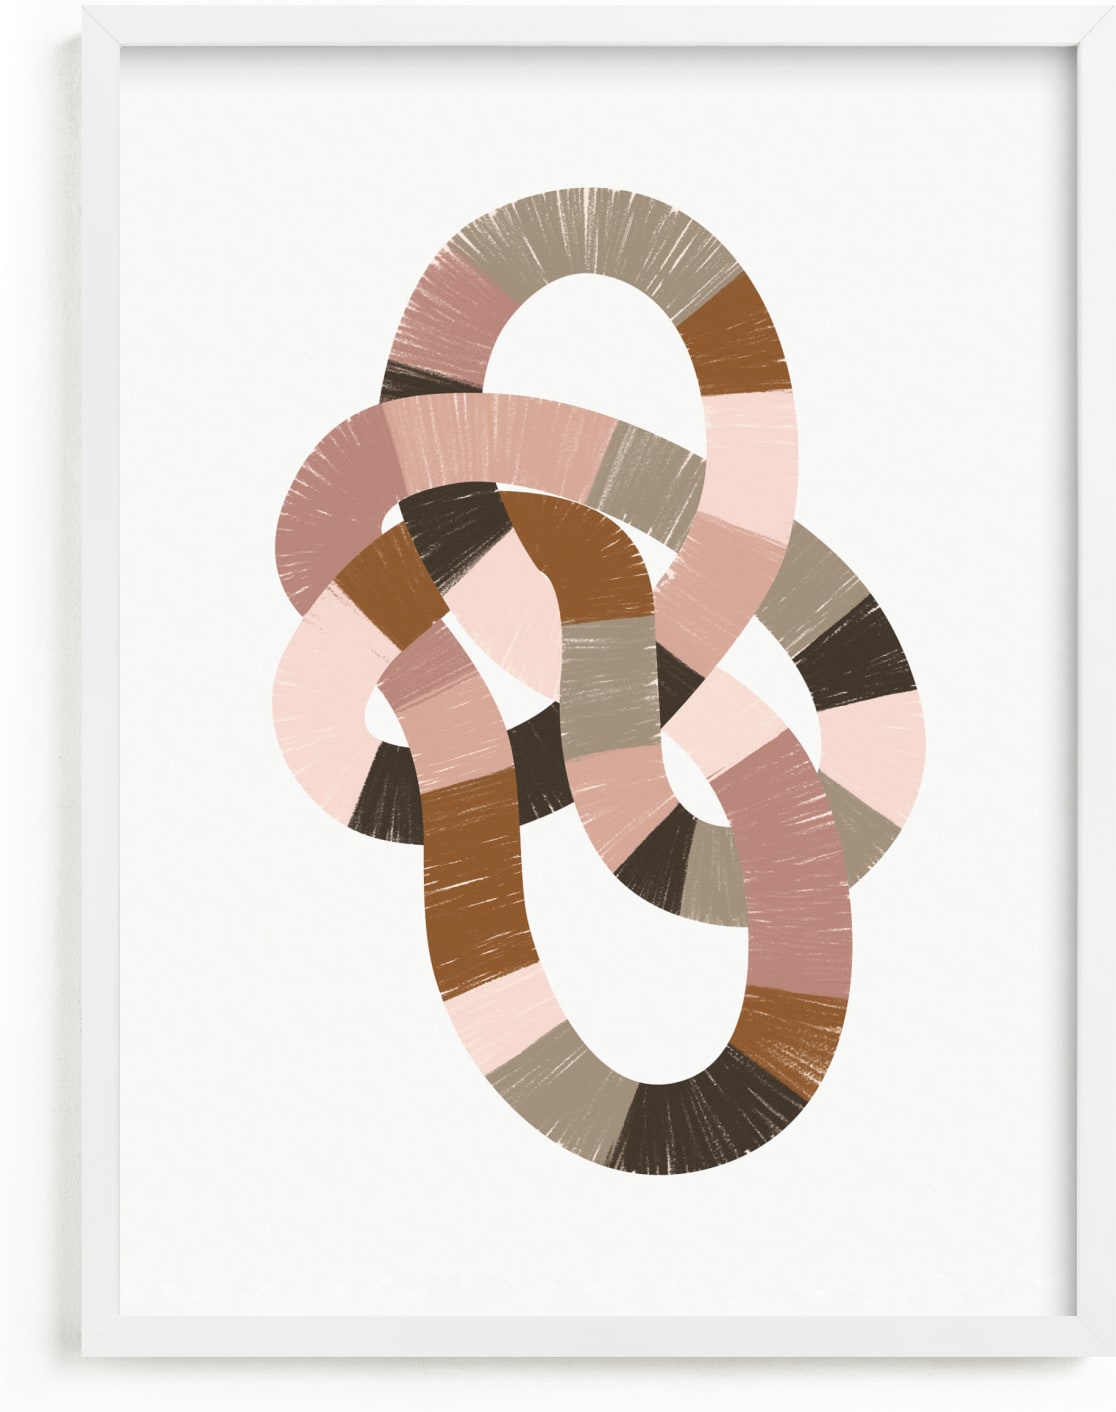 This is a brown art by Pati Cascino called Running in Circles.